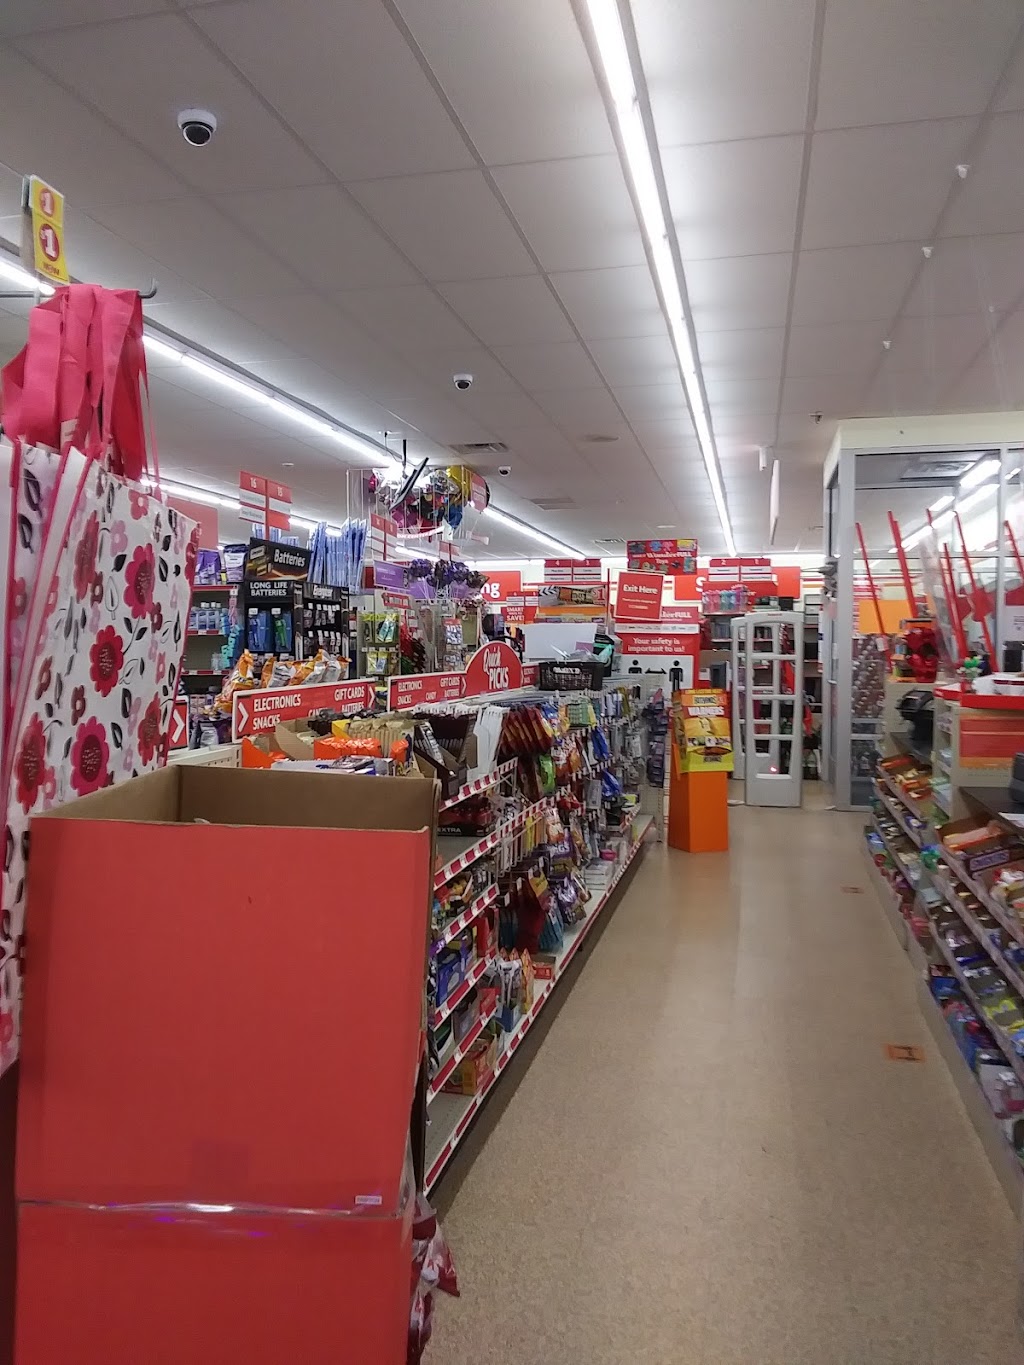 Family Dollar | 1625 Haines Rd, Levittown, PA 19055 | Phone: (267) 589-8379